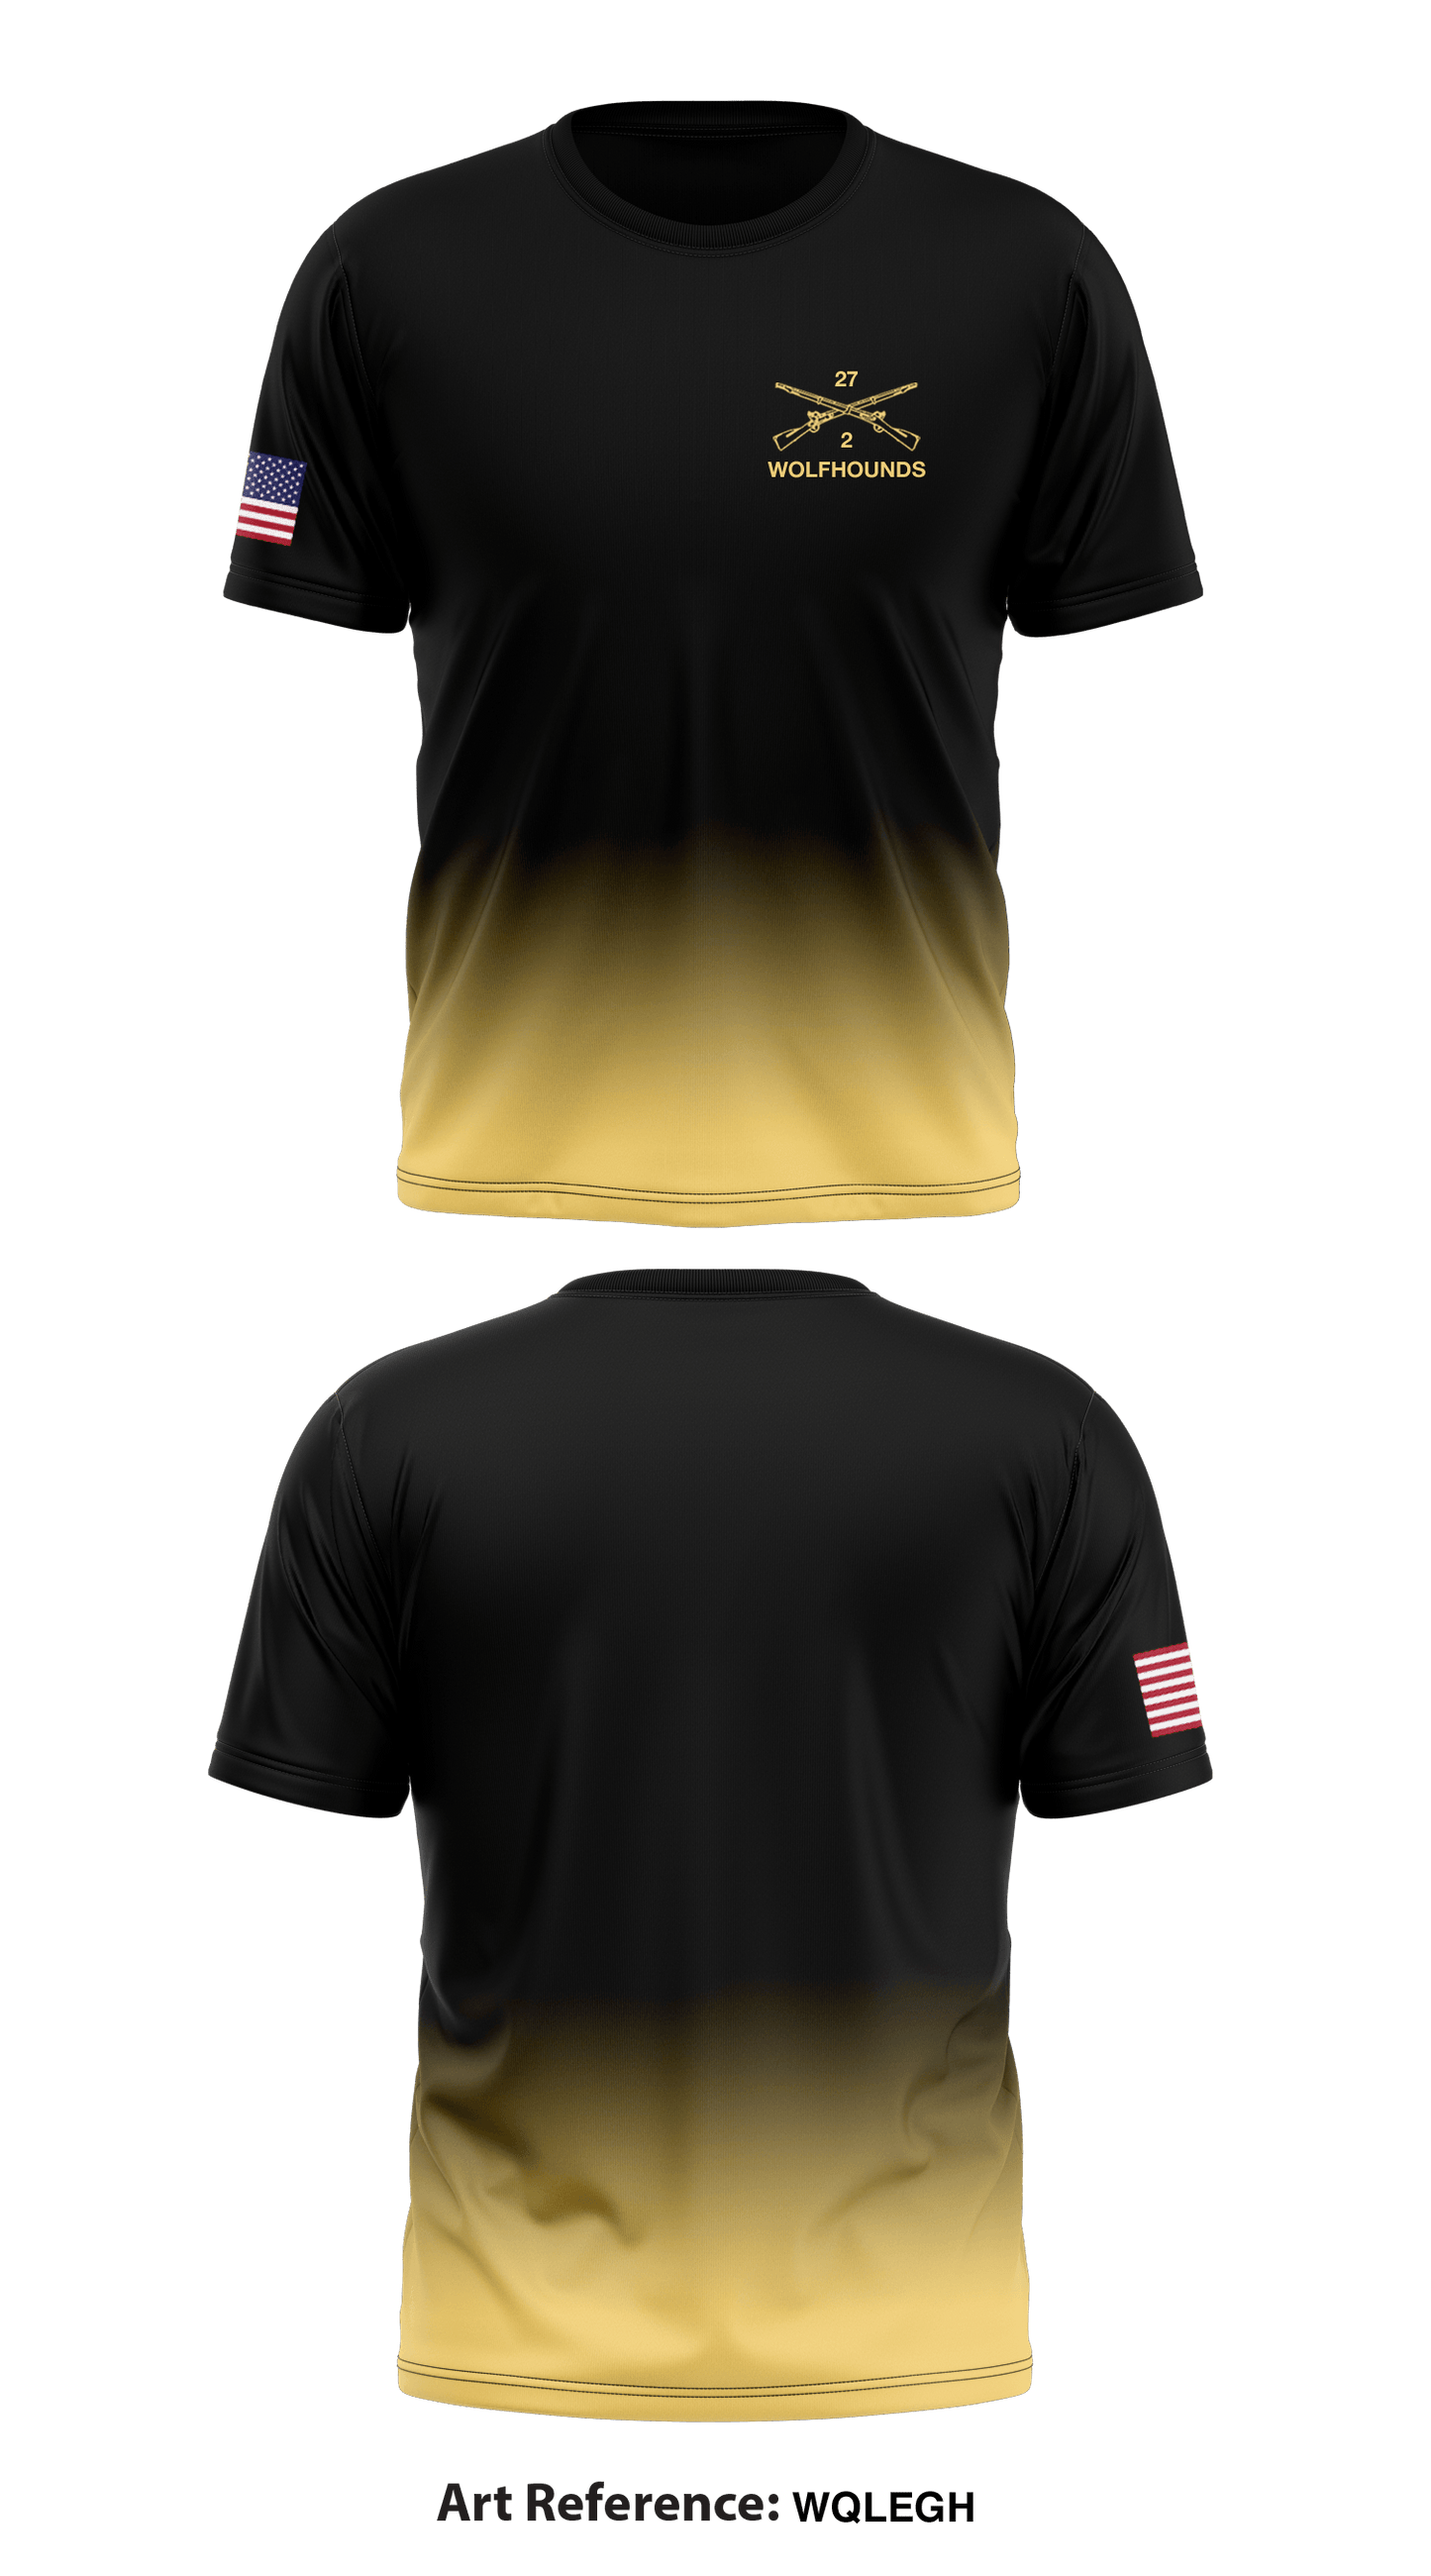 2-27 IN Wolfhounds Store 1 Core Men's SS Performance Tee - WQLegh